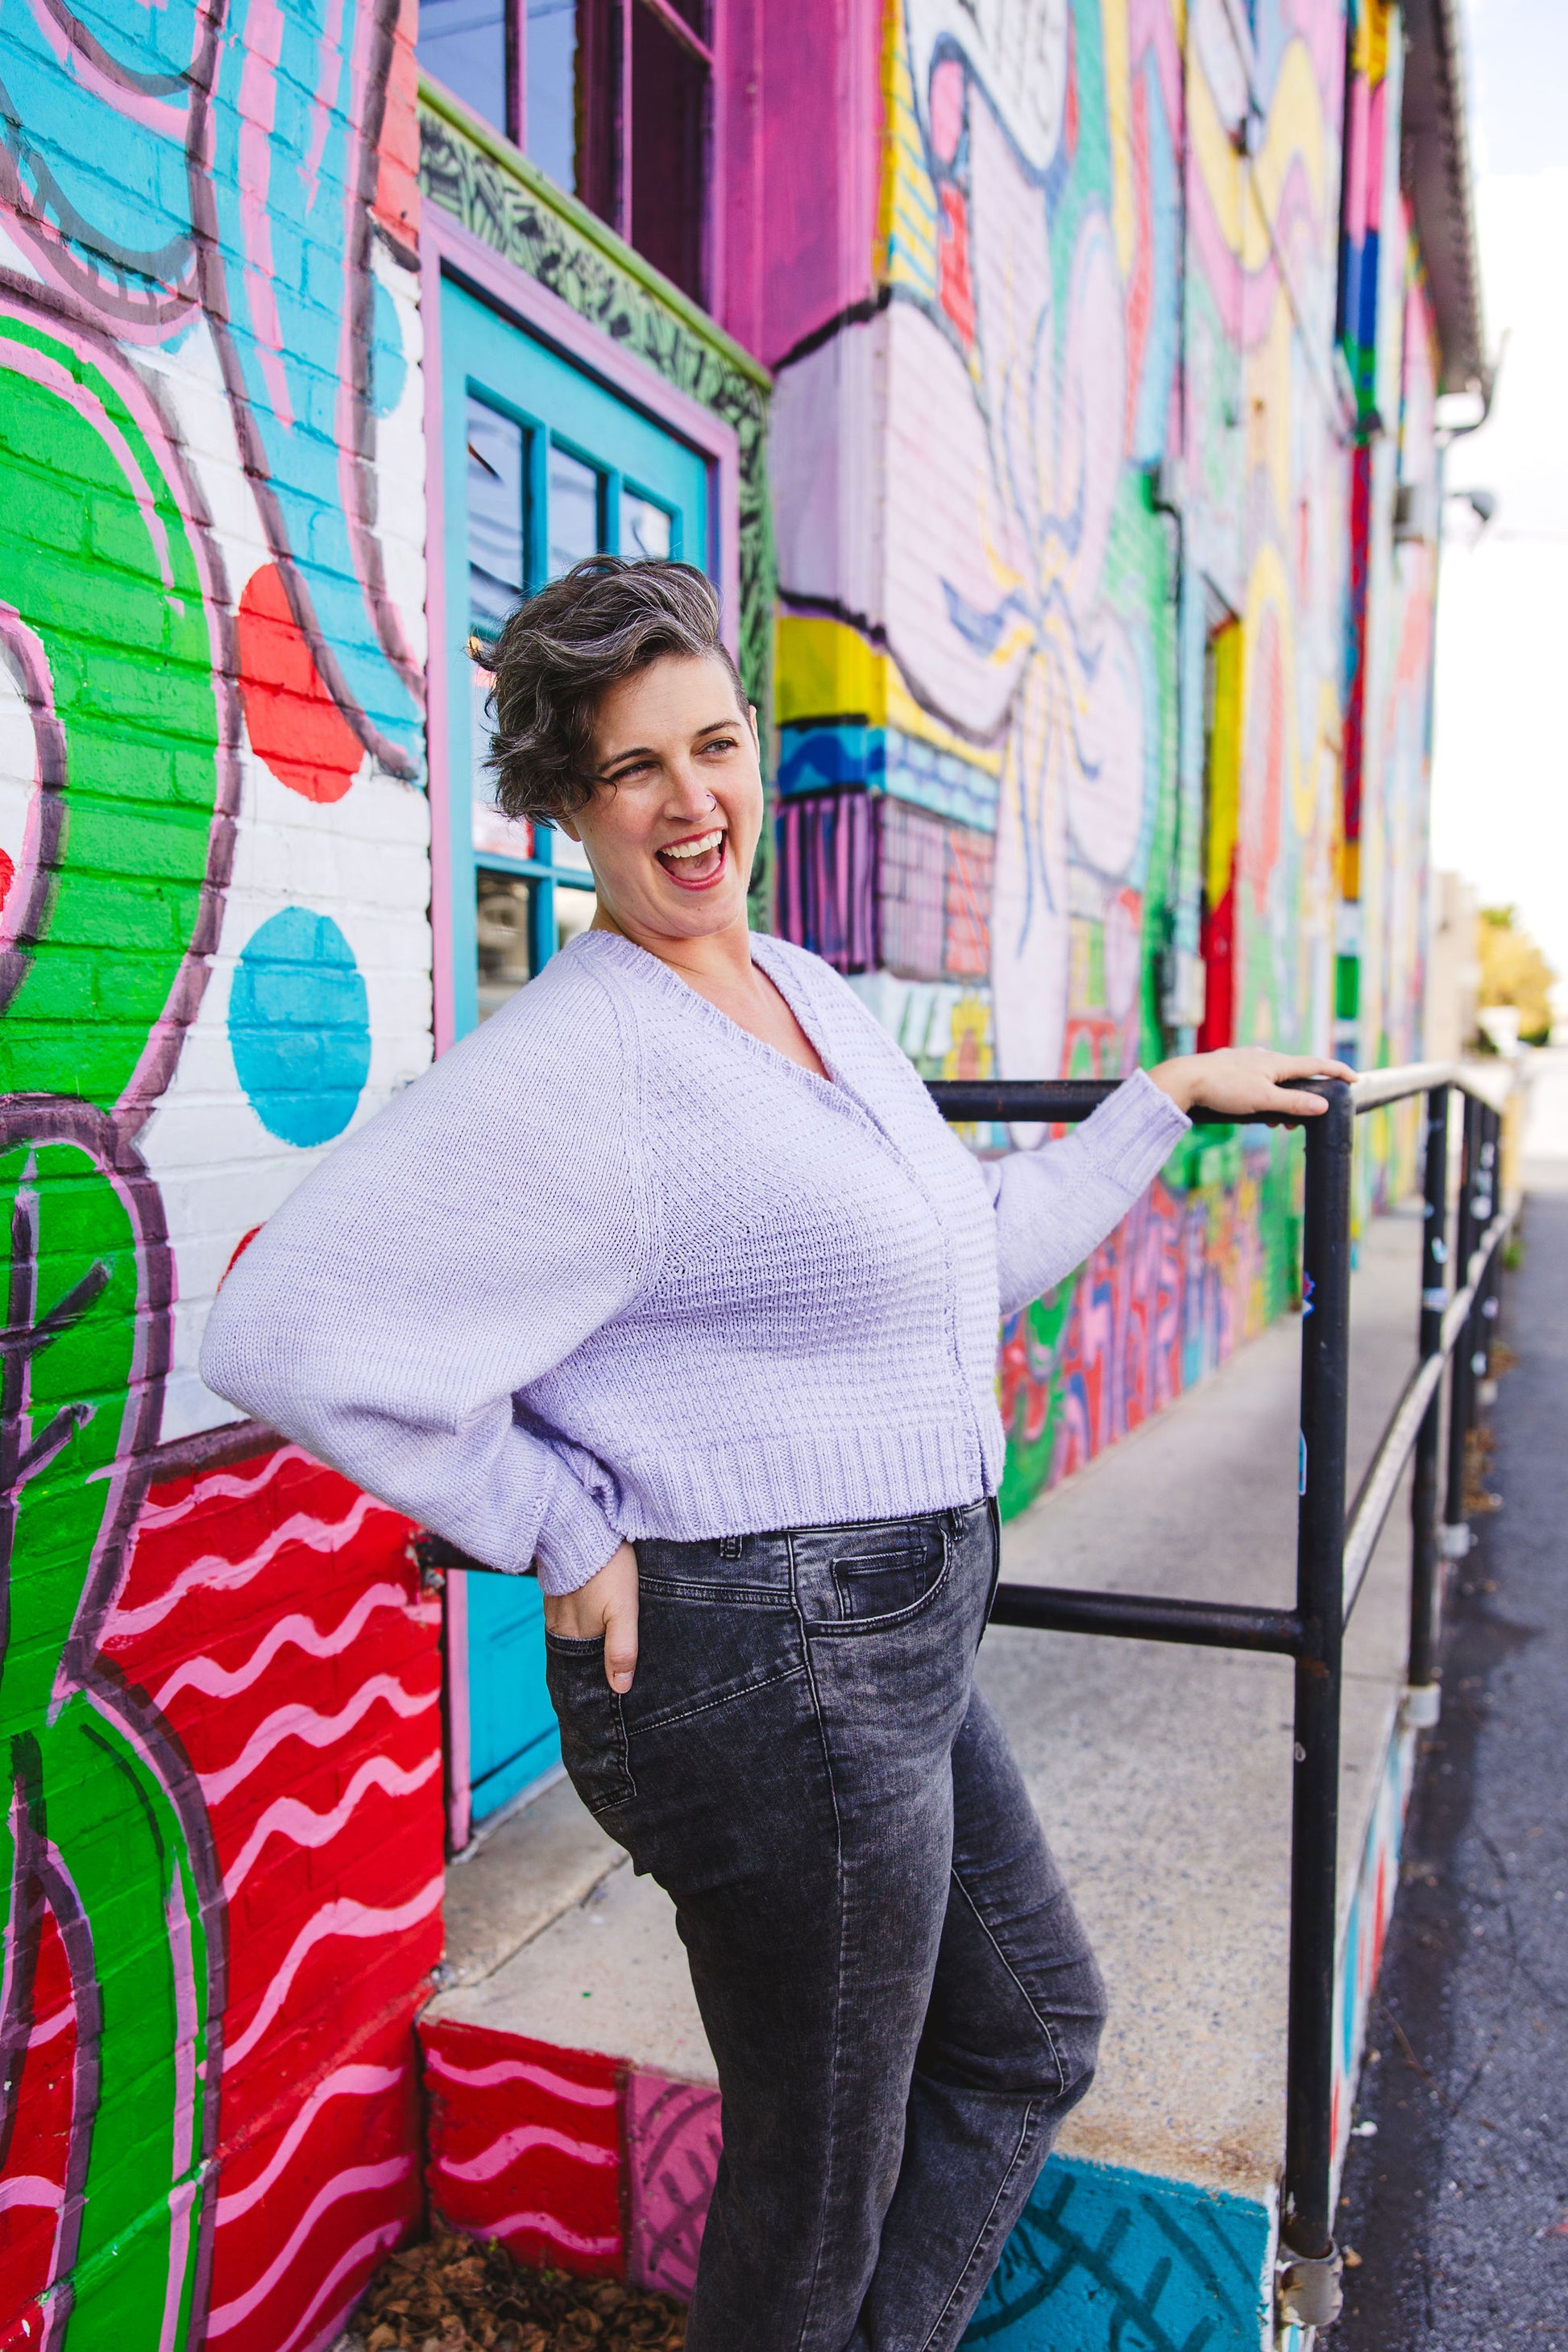 Jen, wearing a light purple zip-up sweater, holds the railing of a ramp in front of a wall mural and smiles, looking off camera. She has one hand on her hip, showing off the roomy sleeves on the sweater, which she wears with black acid wash jeans. A wall mural can be seen in the background.